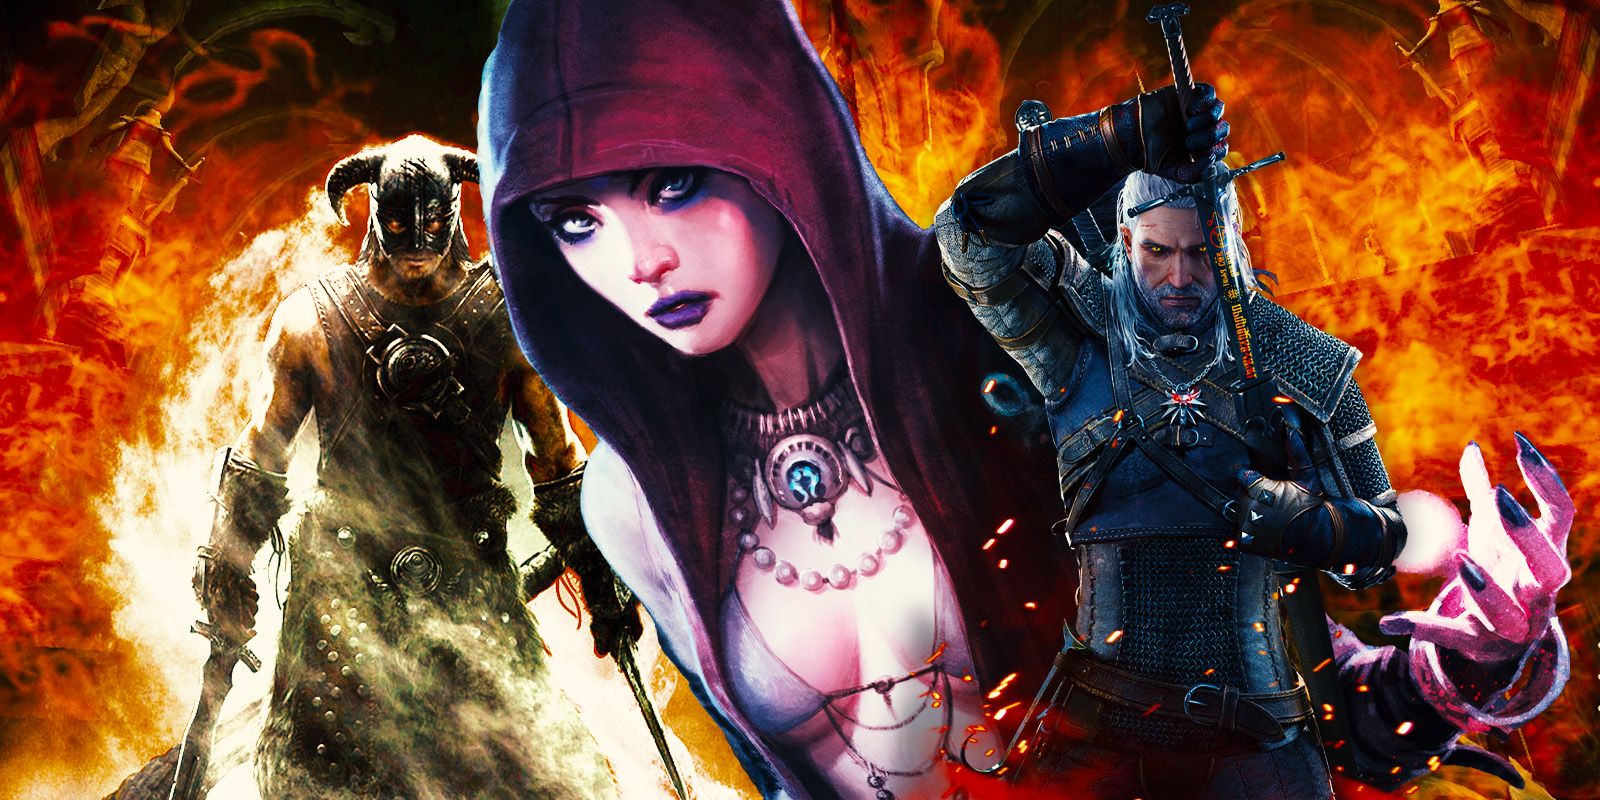 Characters from Skyrim, Dragon Age: Origins, and The Witcher 3 in a collage.